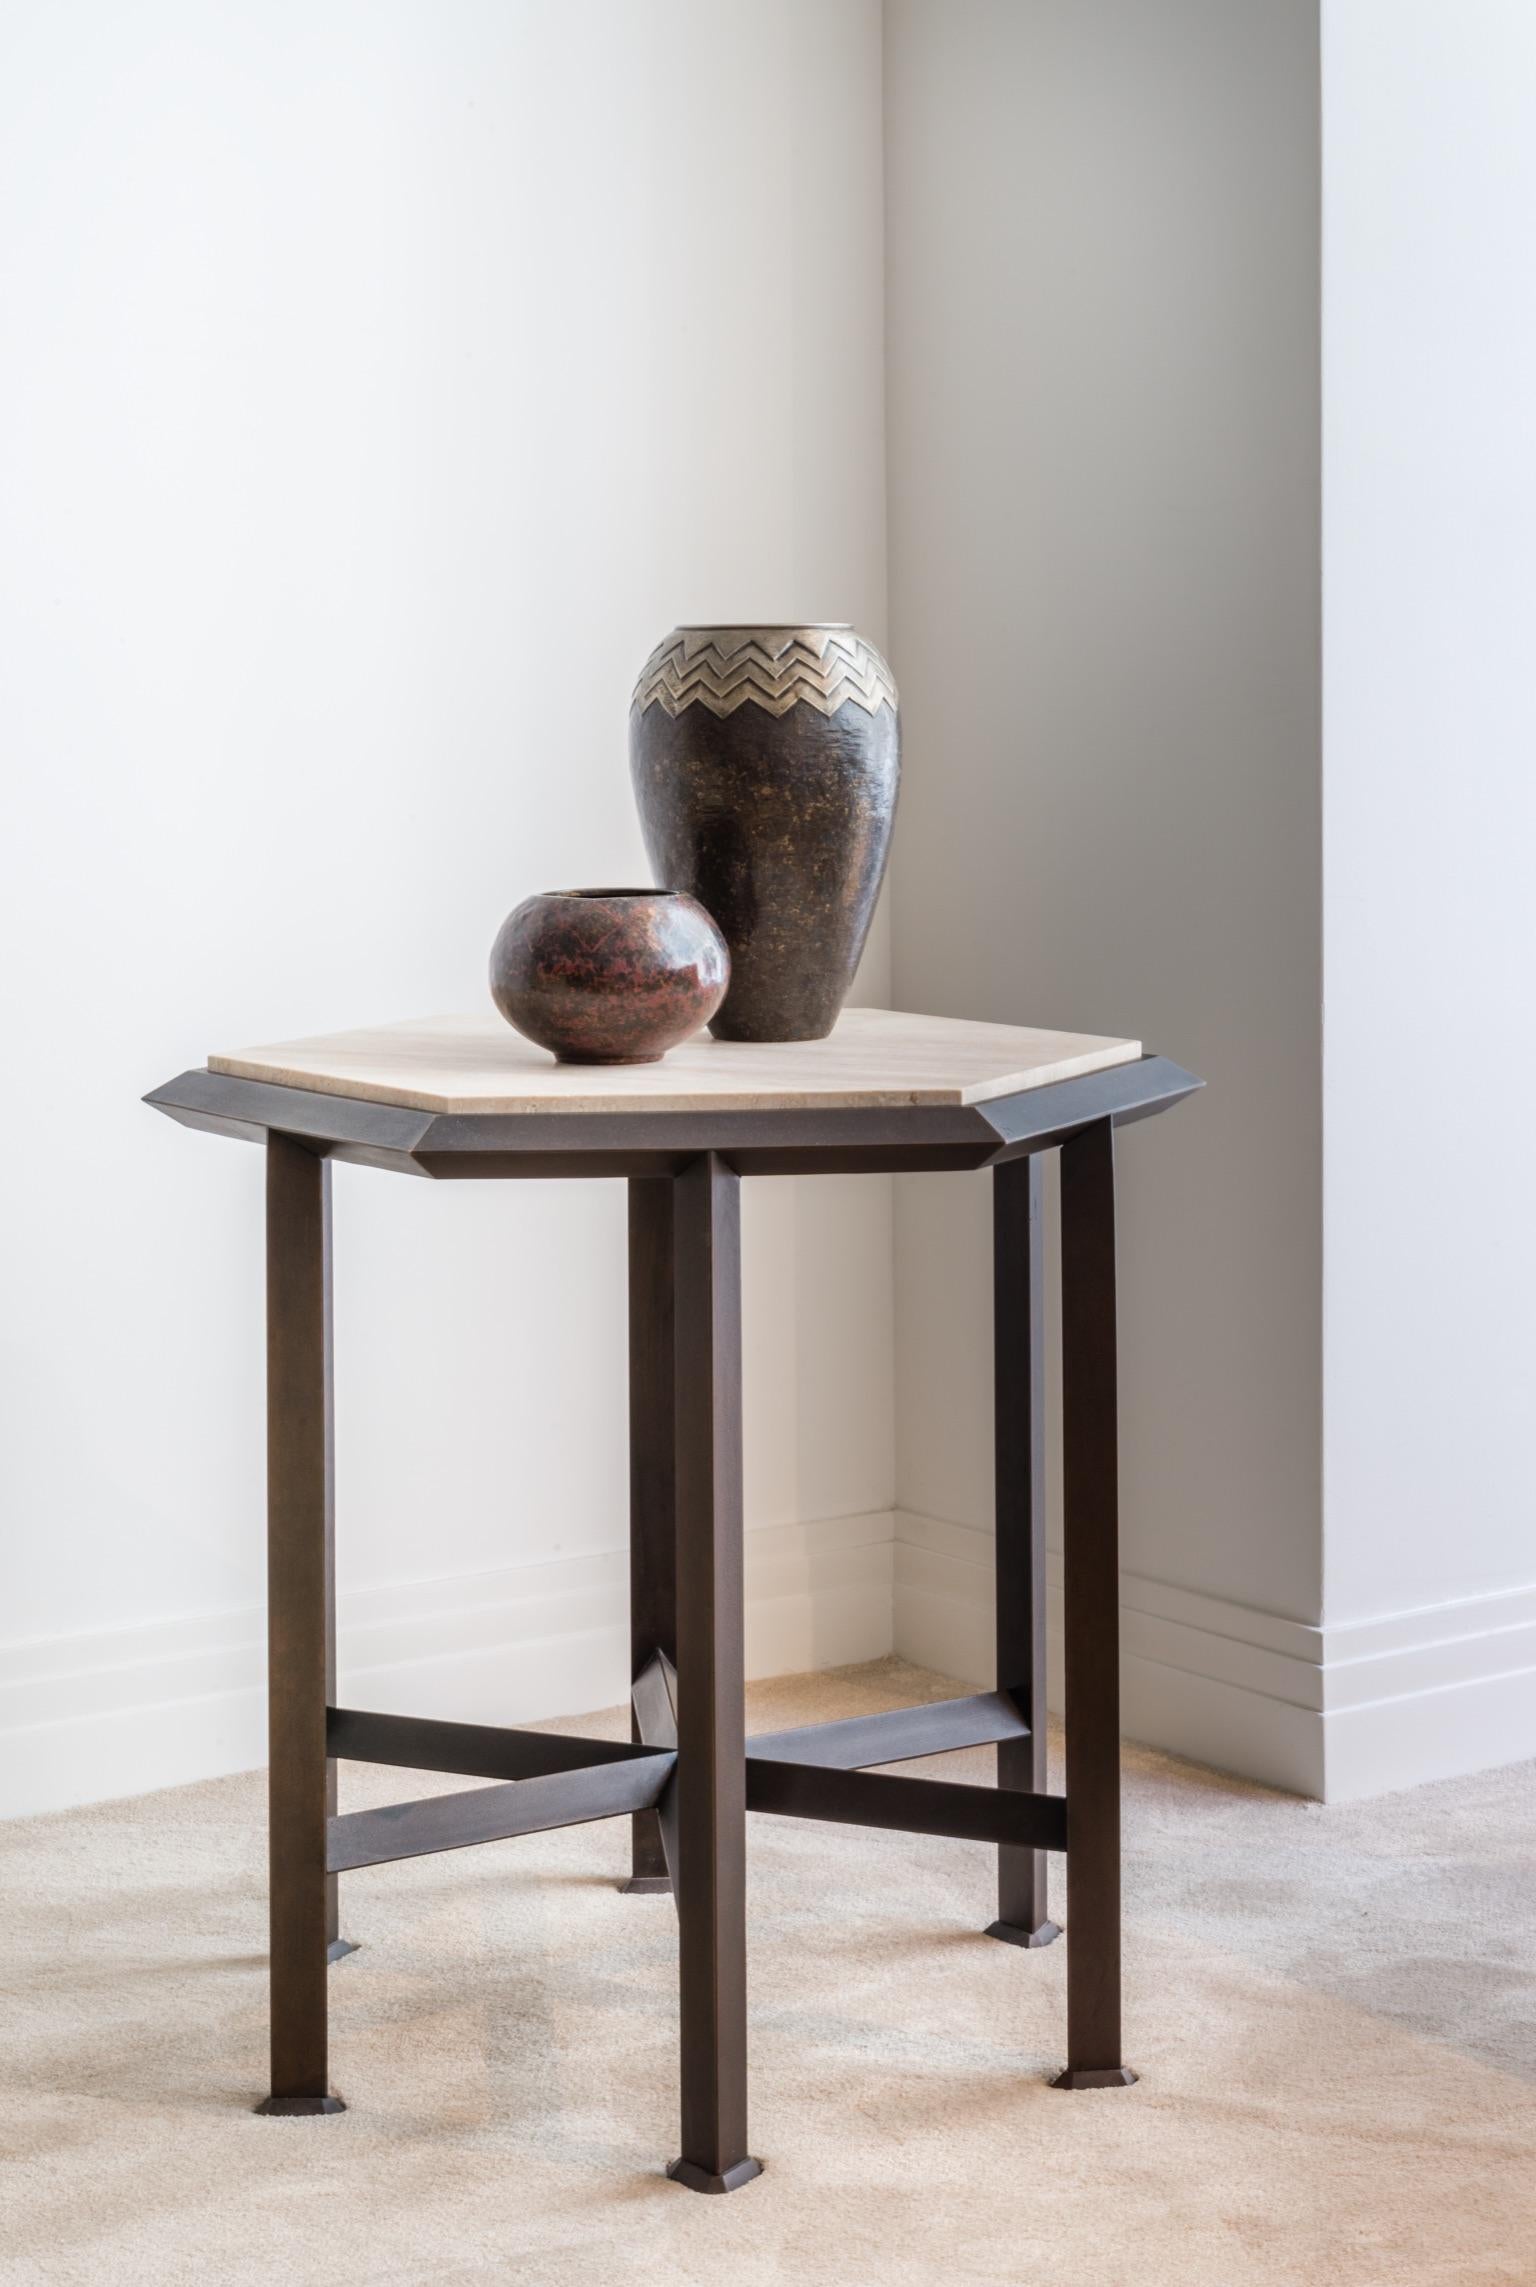 Patinated bronze and softened travertine.

Limited edition of twelve numbered and signed pieces.
The Orion pedestal table is a real gem of geometry. All its constituent elements are based on the figure of the triangle. Its base is a clever